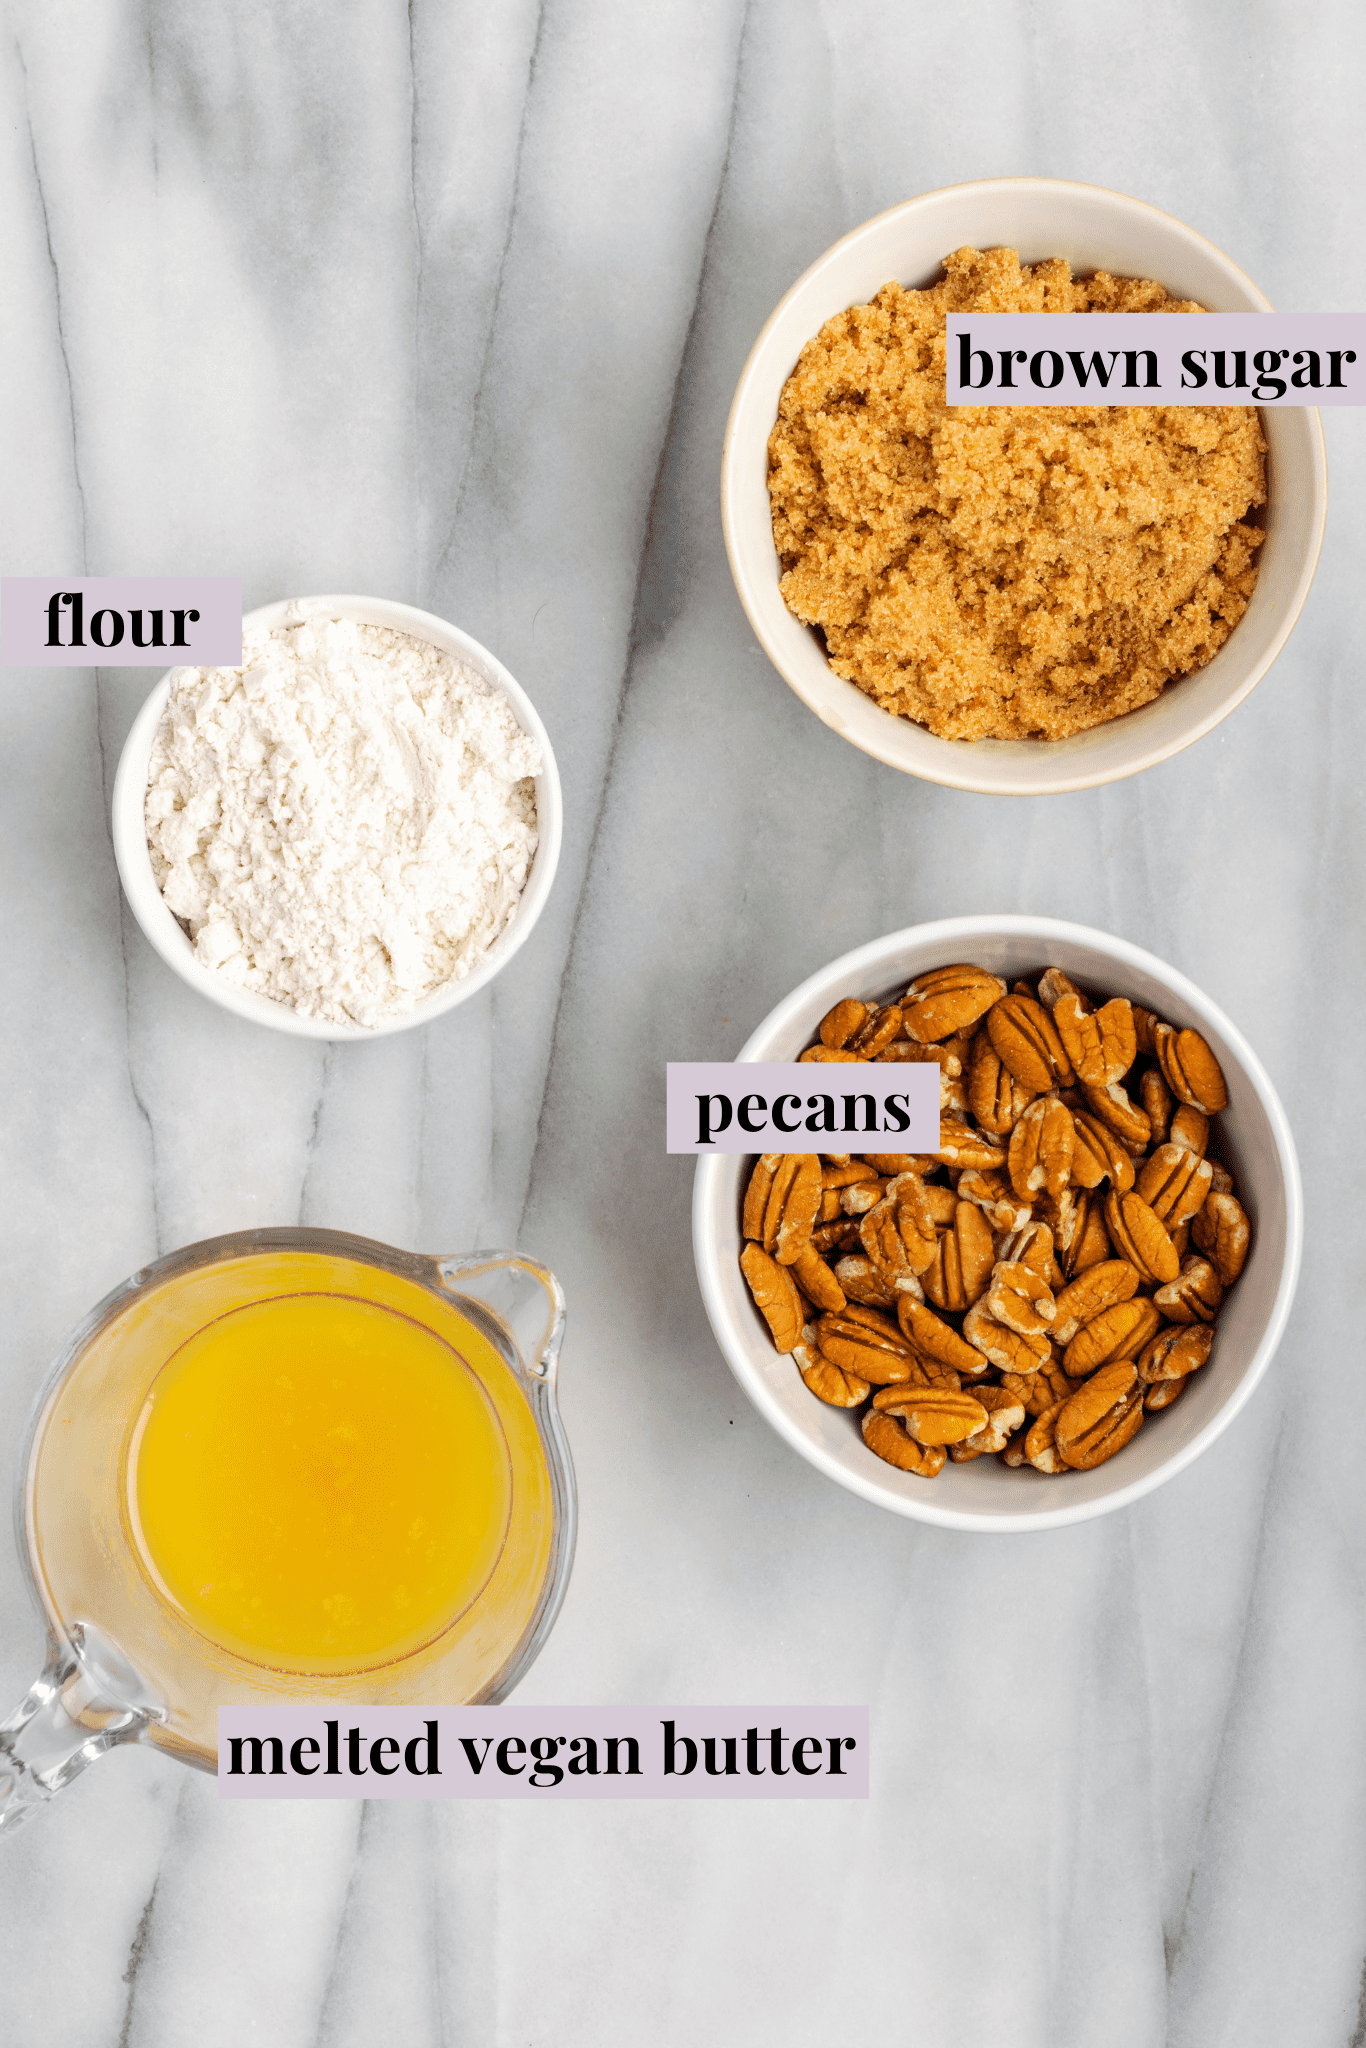 Overhead view of the ingredients for sweet potato soufflé: a bowl of brown sugar, flour, pecans and melted vegan butter